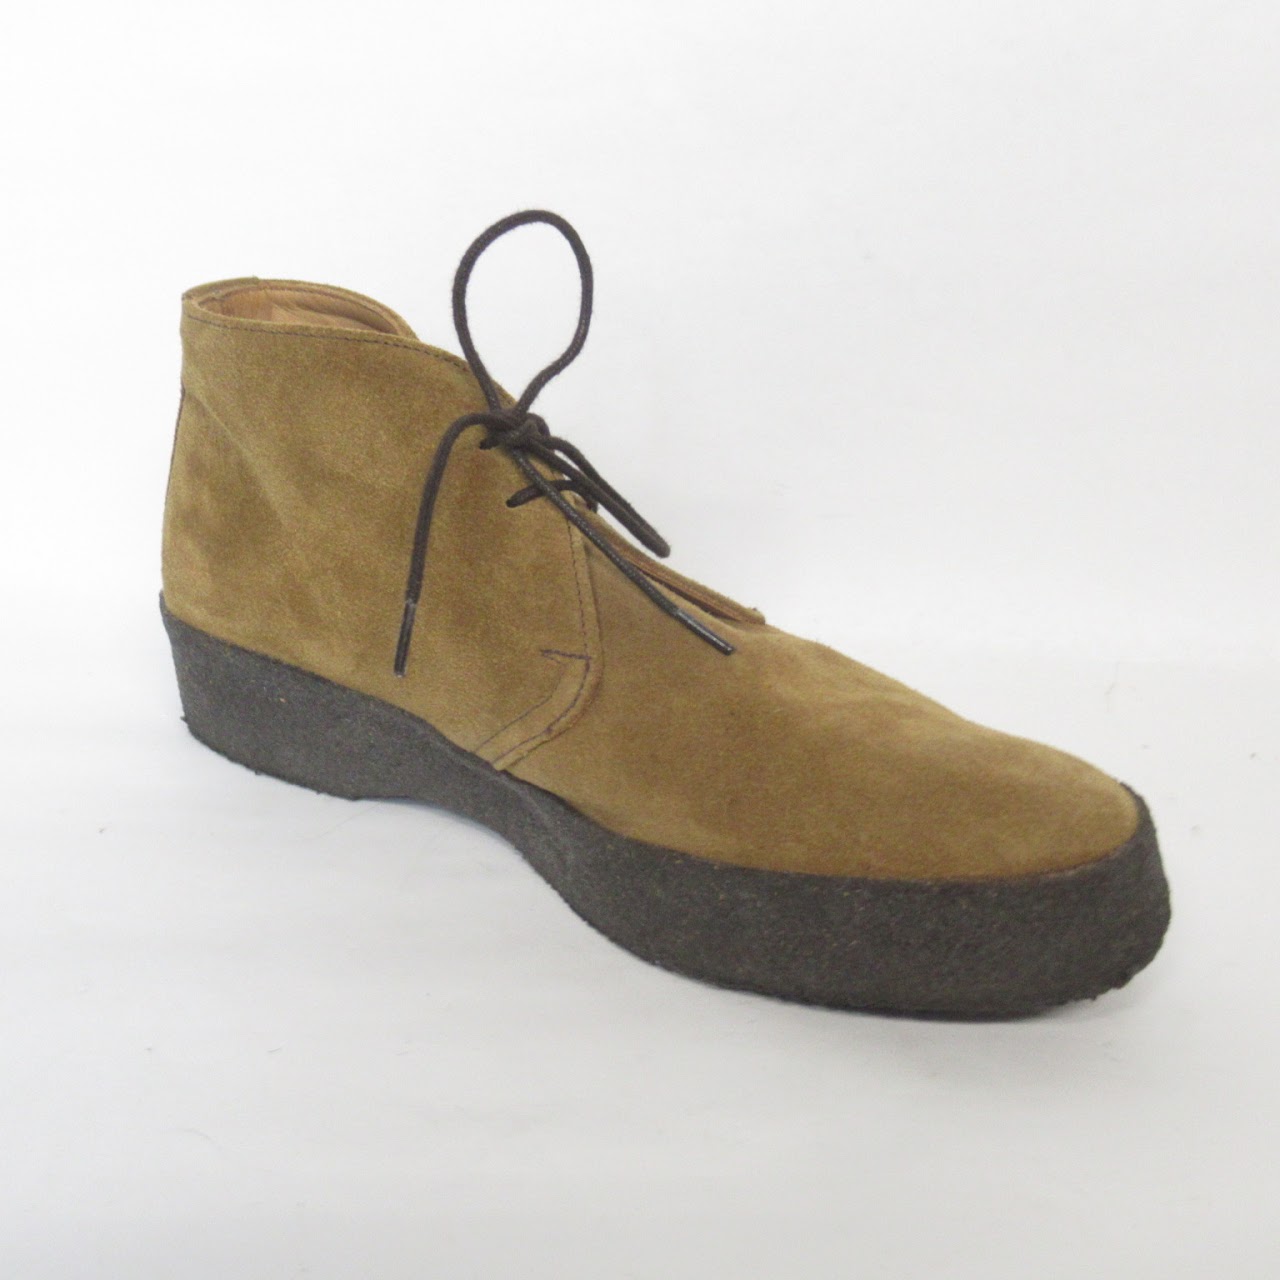 Sanders Suede Leather Chukka Boots